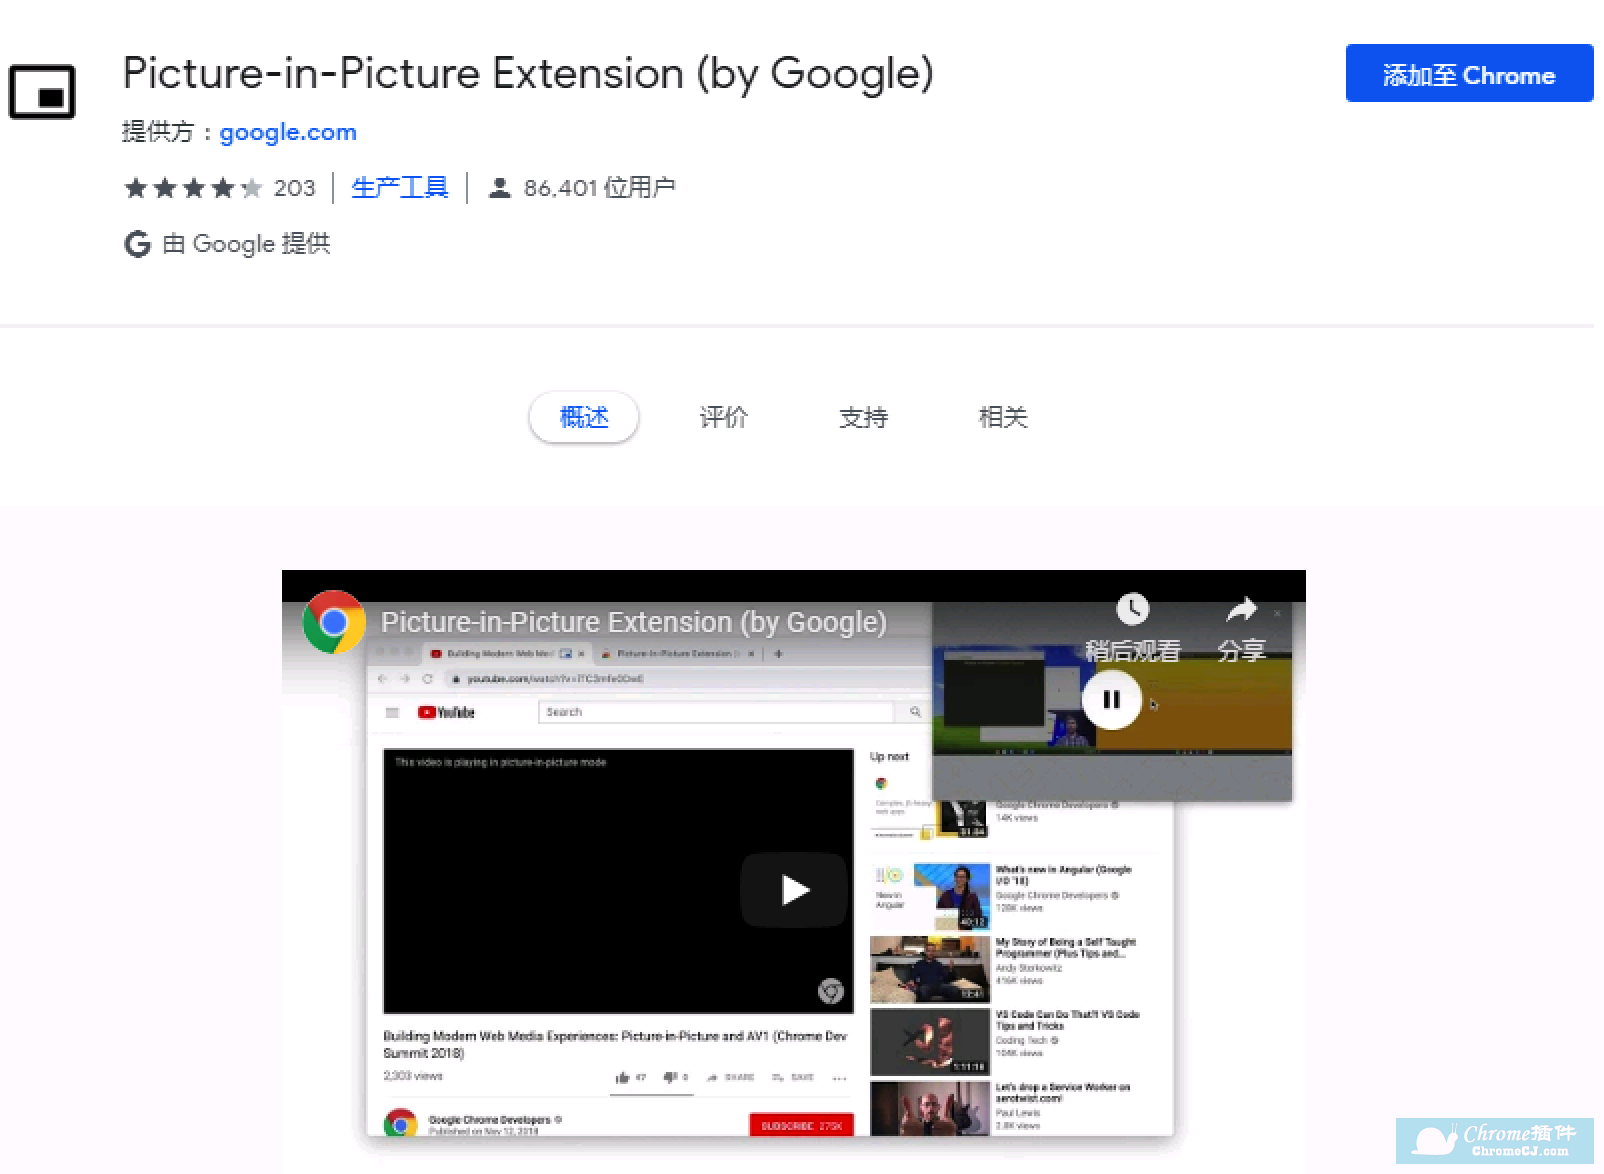 Picture-in-Picture Extension (by Google)使用方法